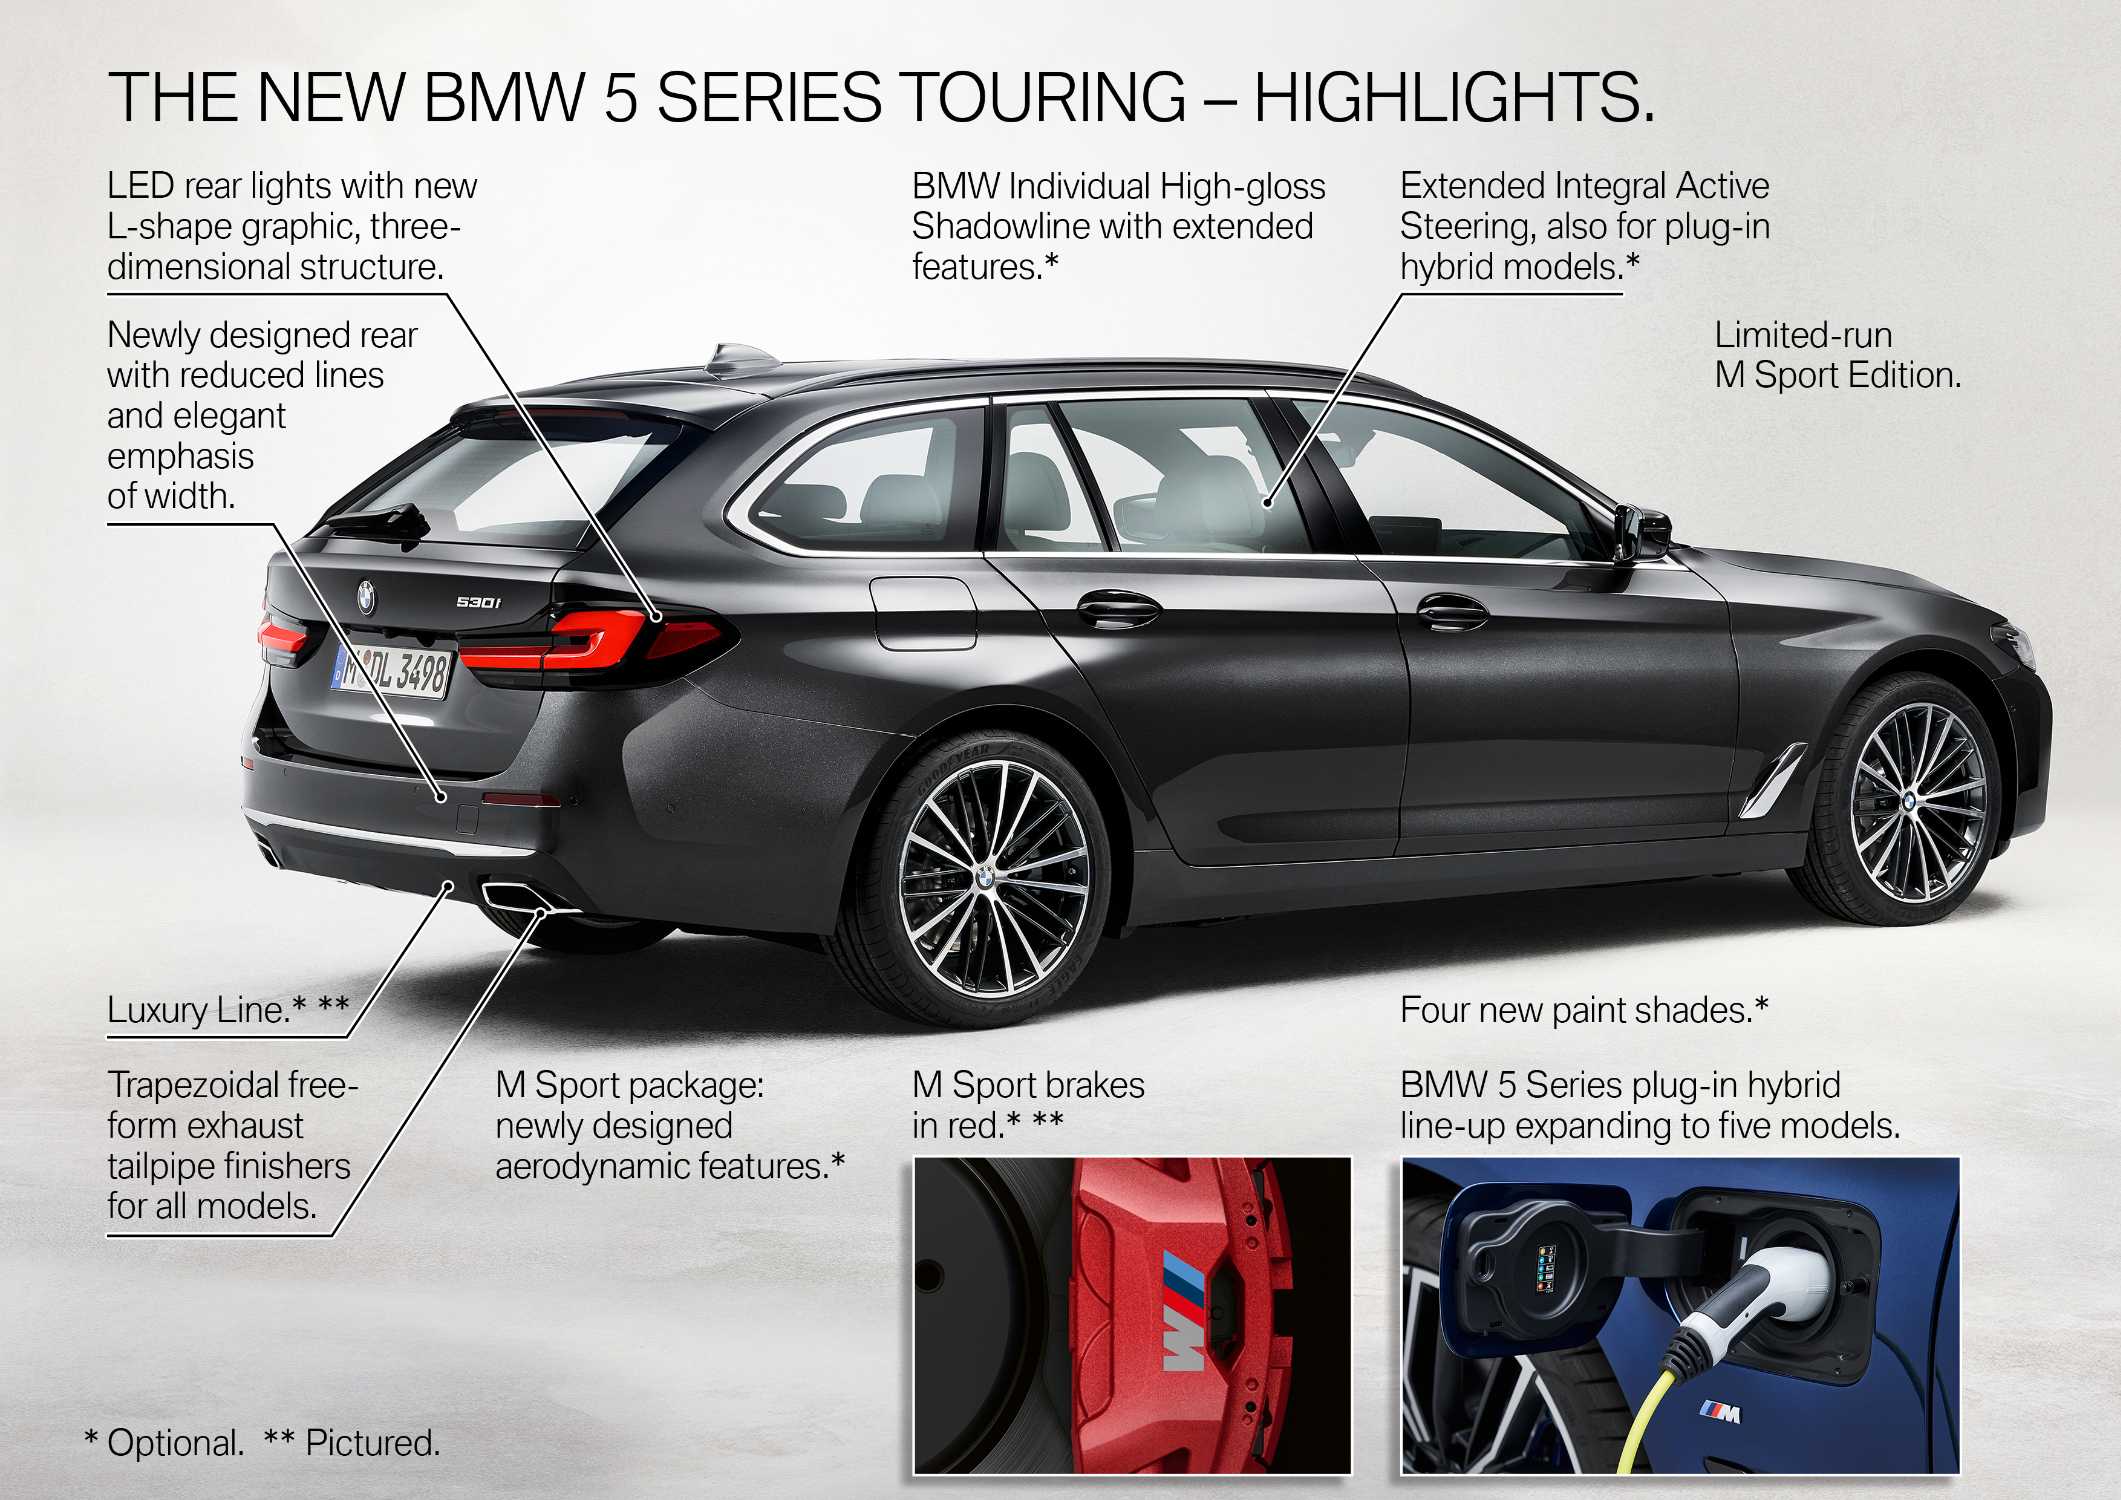 The new BMW 5 Series - Highlights (05/2020)